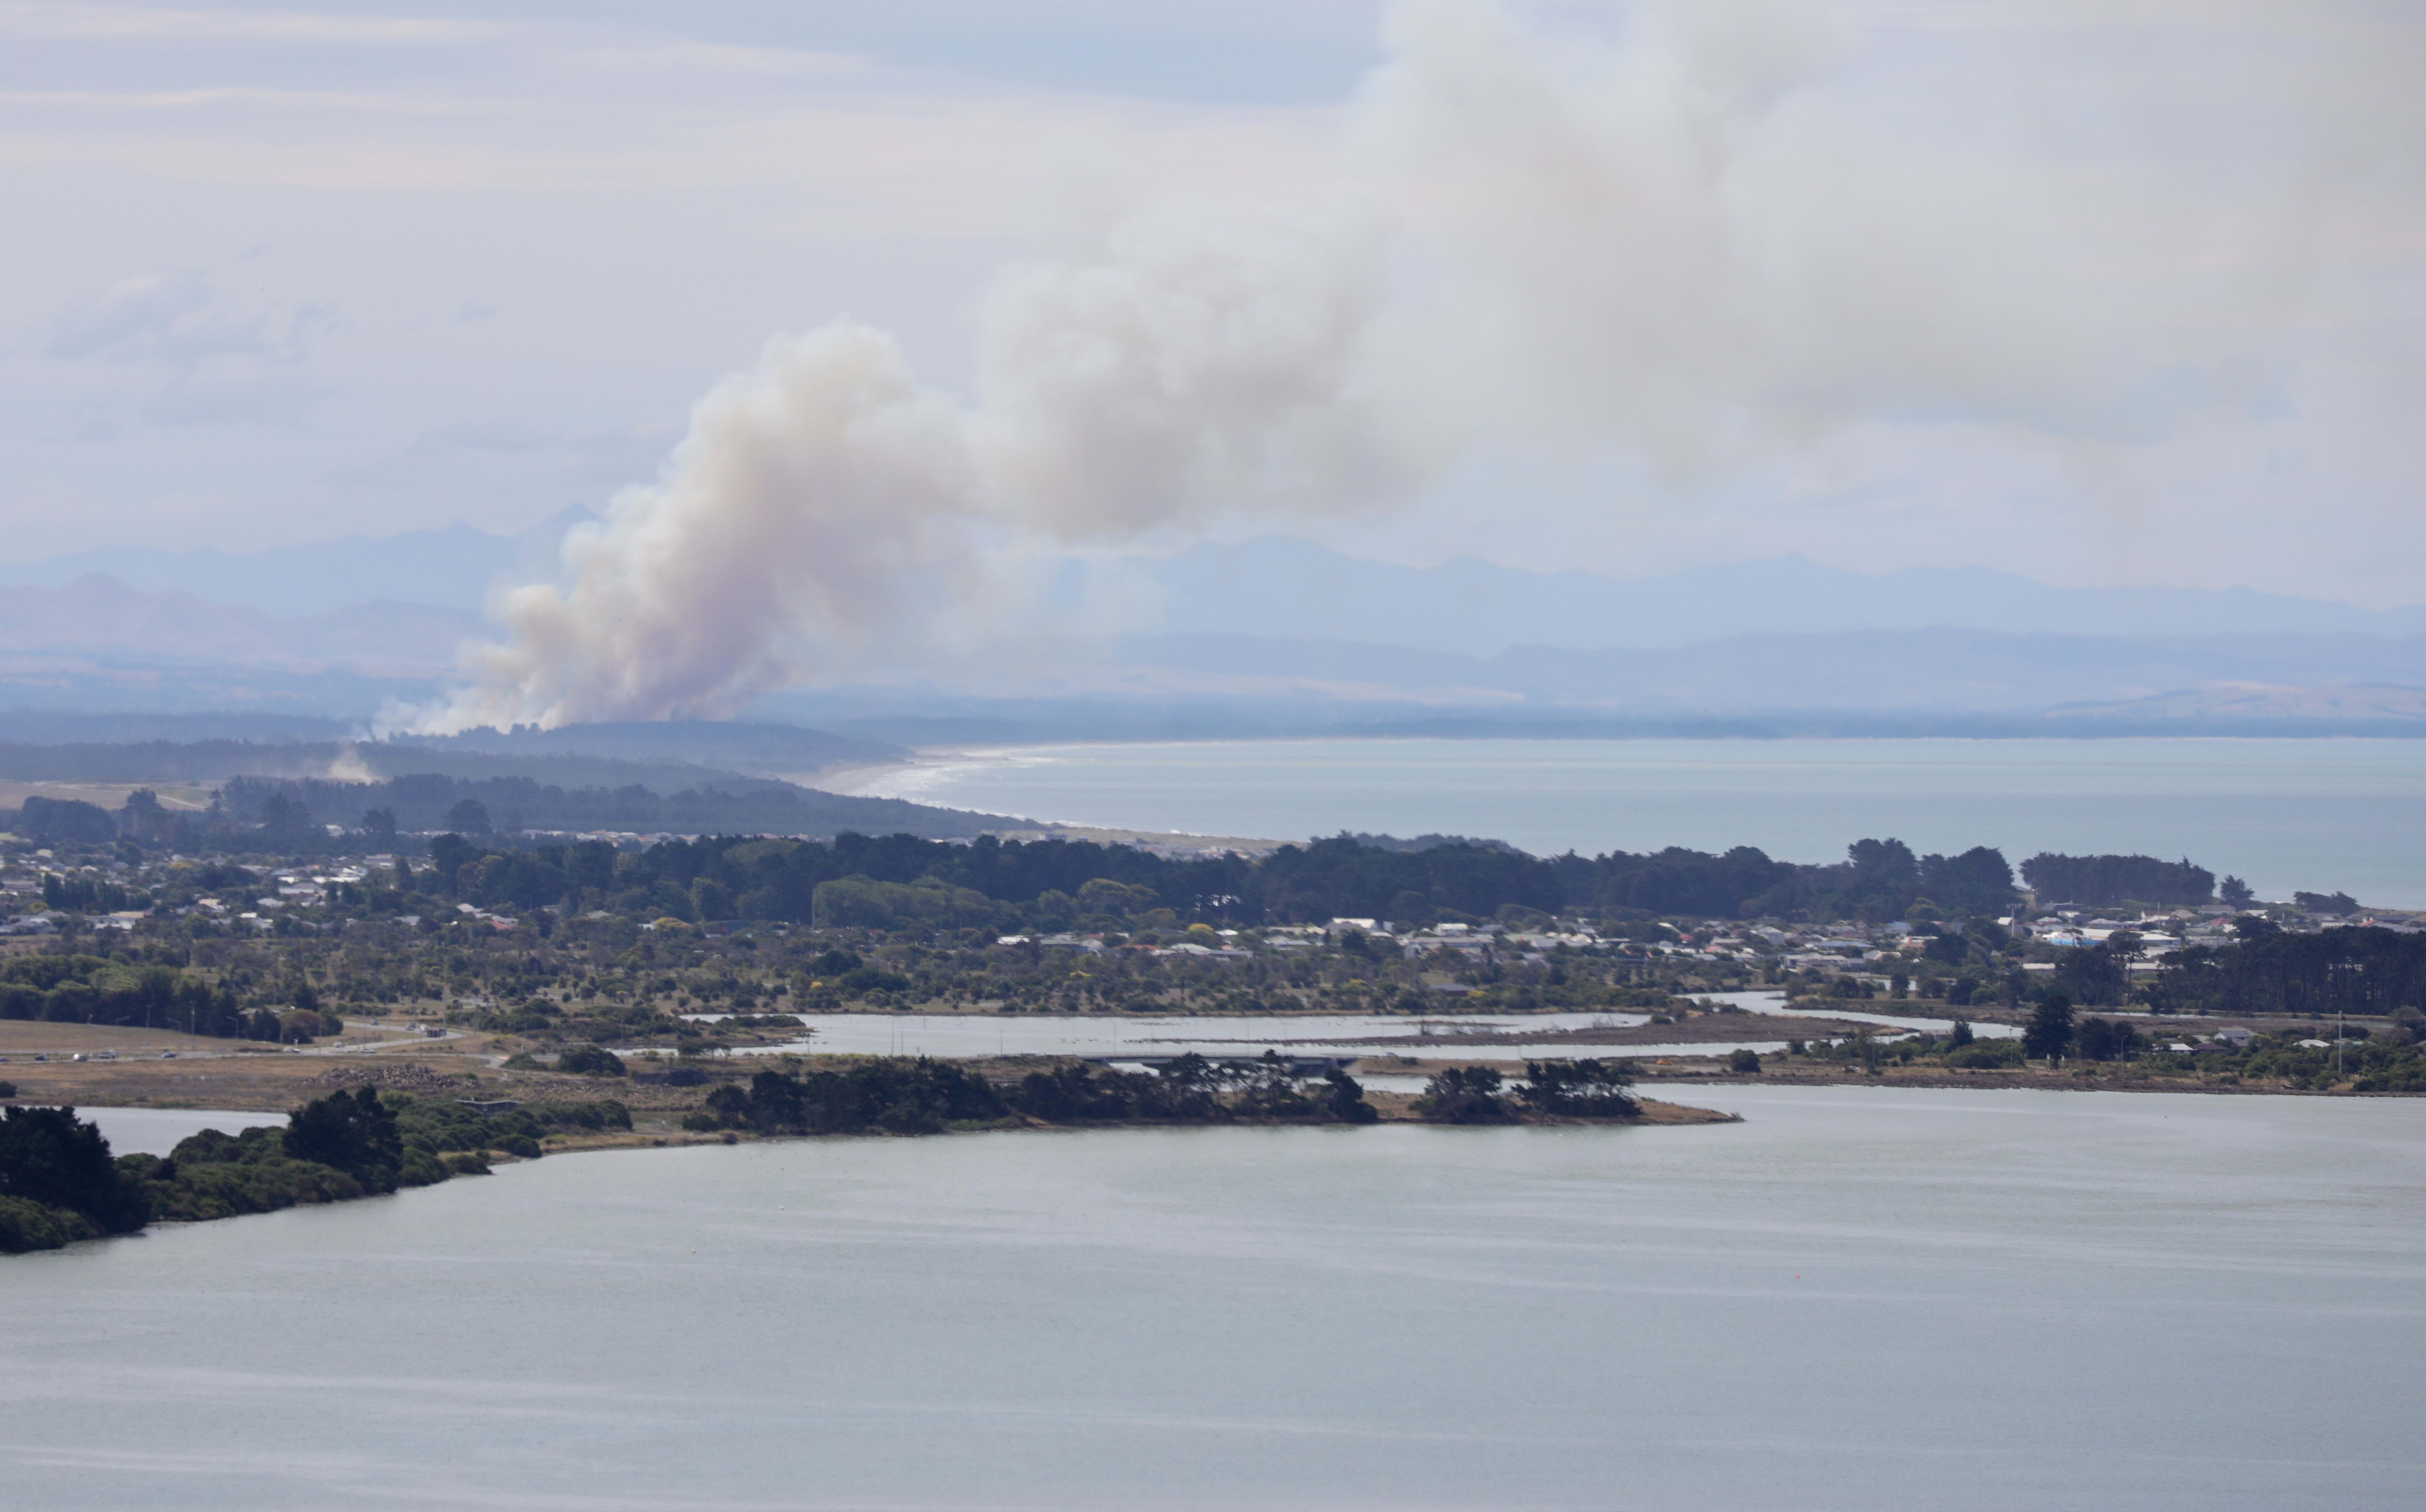 A fire at Pines Beach, near Kaiapoi north of Christchurch, on 25 January.